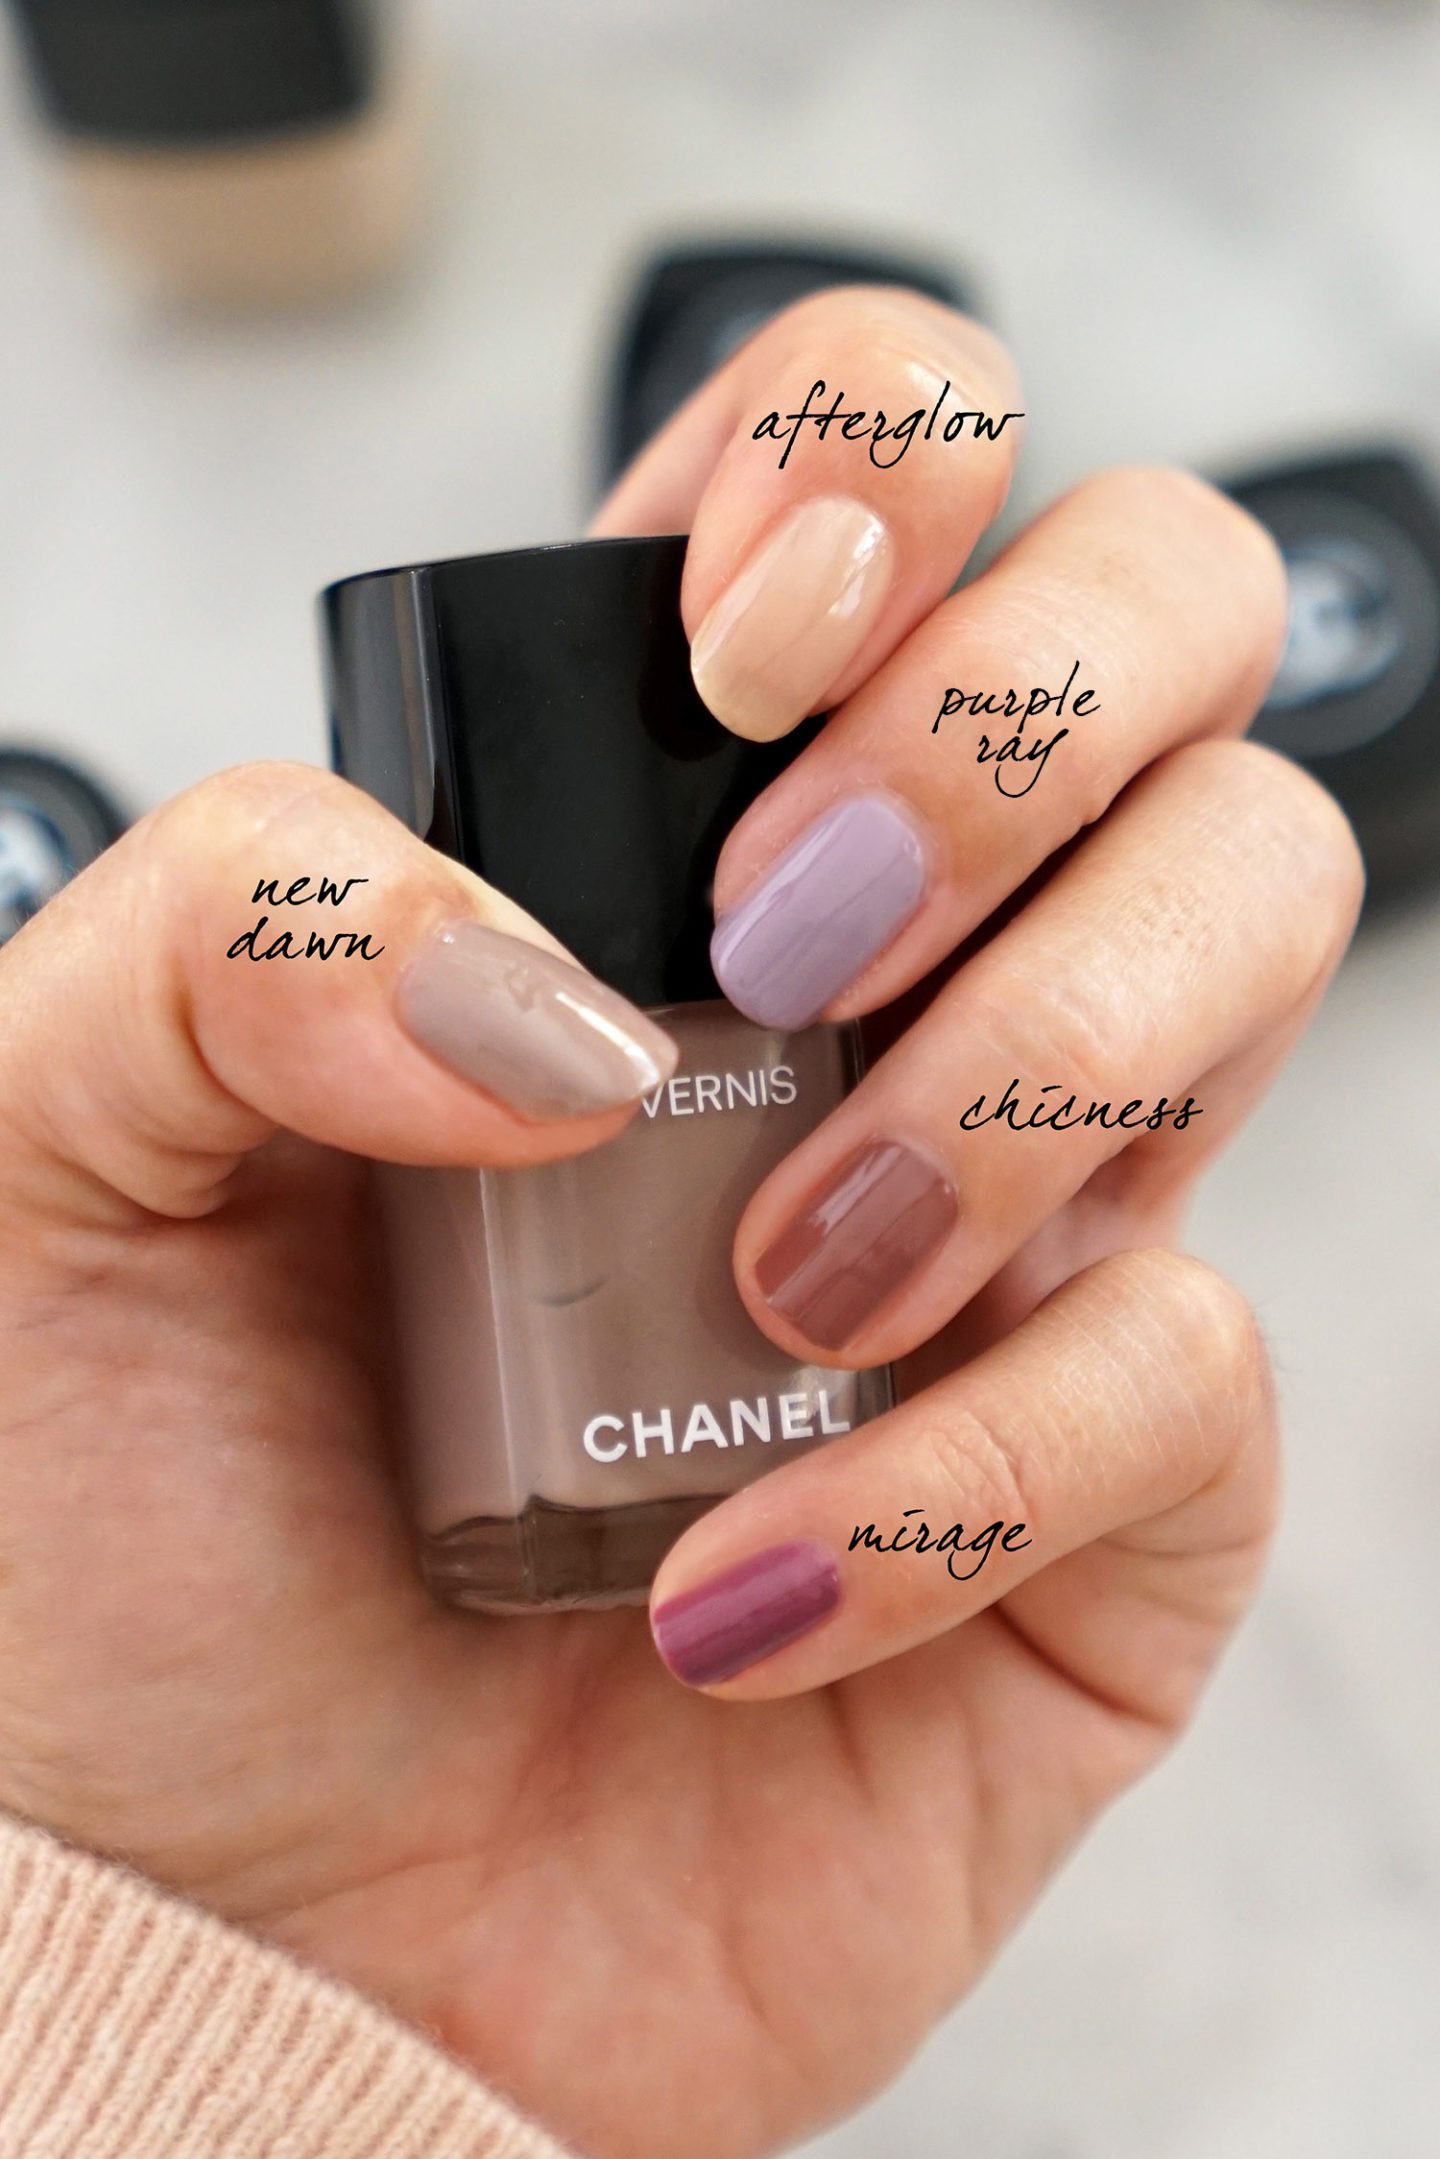 Chanel Le Vernis New Dawn, Afterglow, Purple Ray, Chicness et Mirage